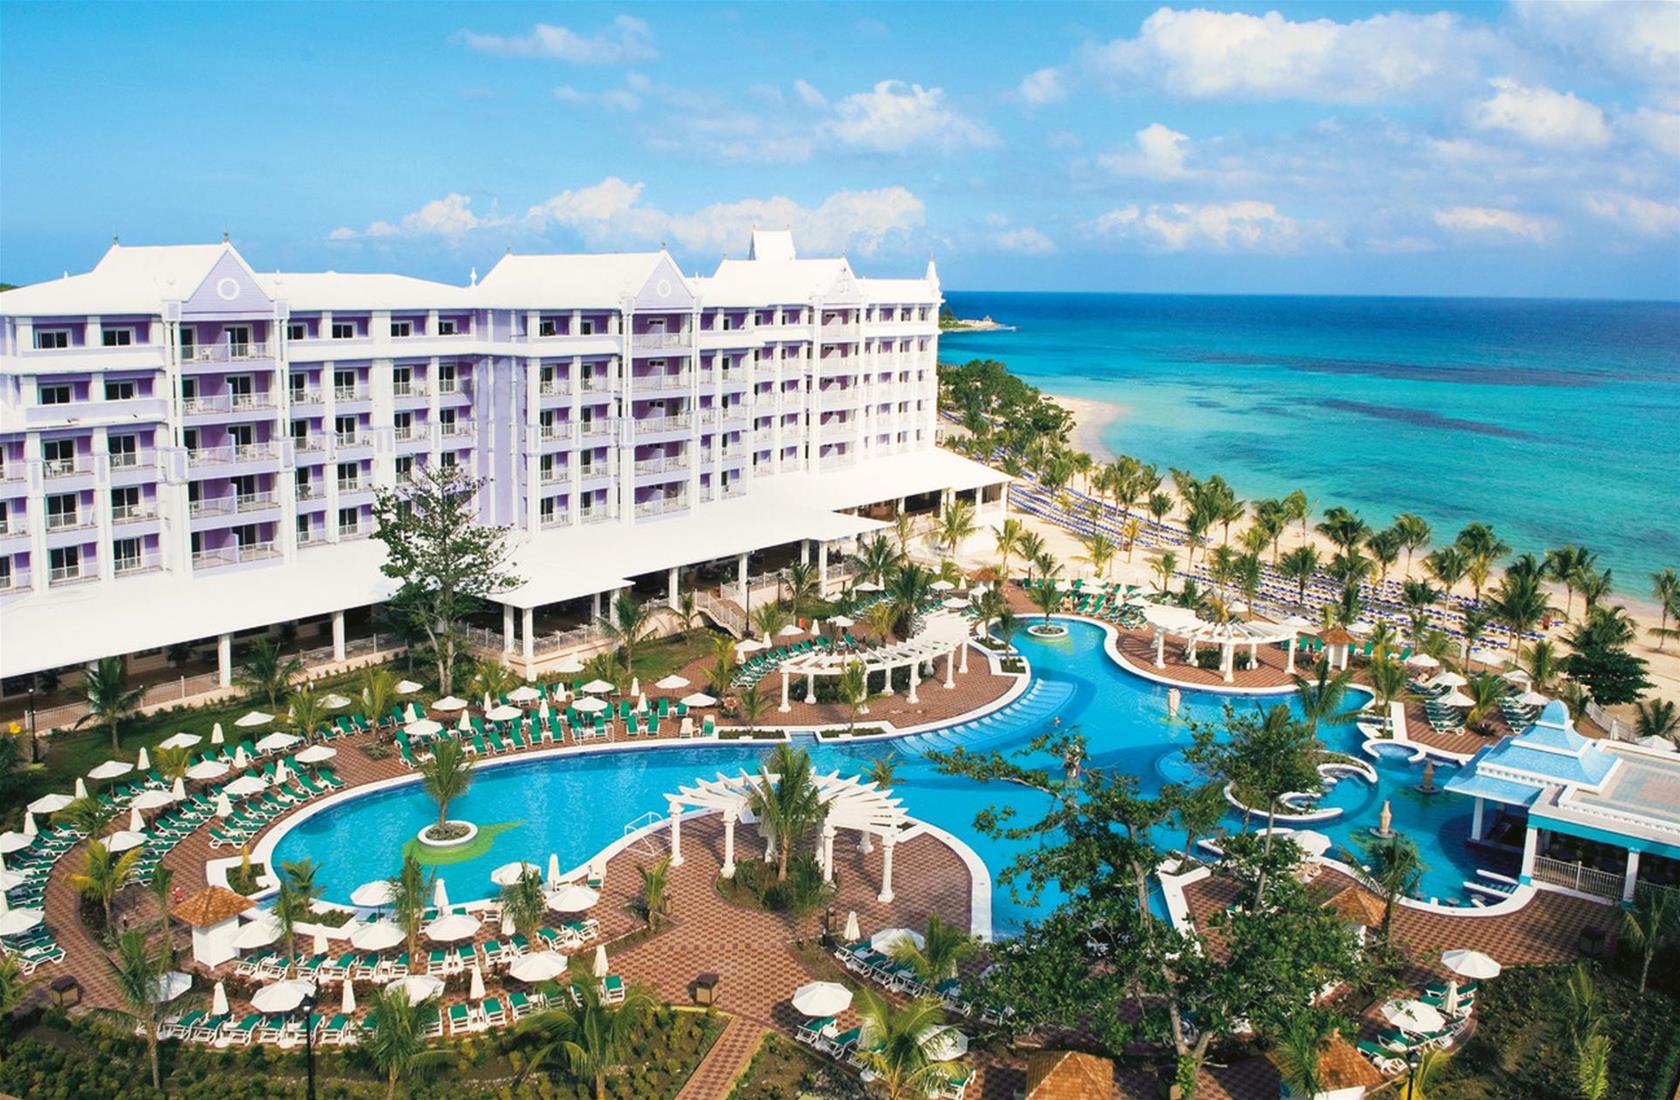 Top 3 all-inclusive resorts in Jamaica for singles